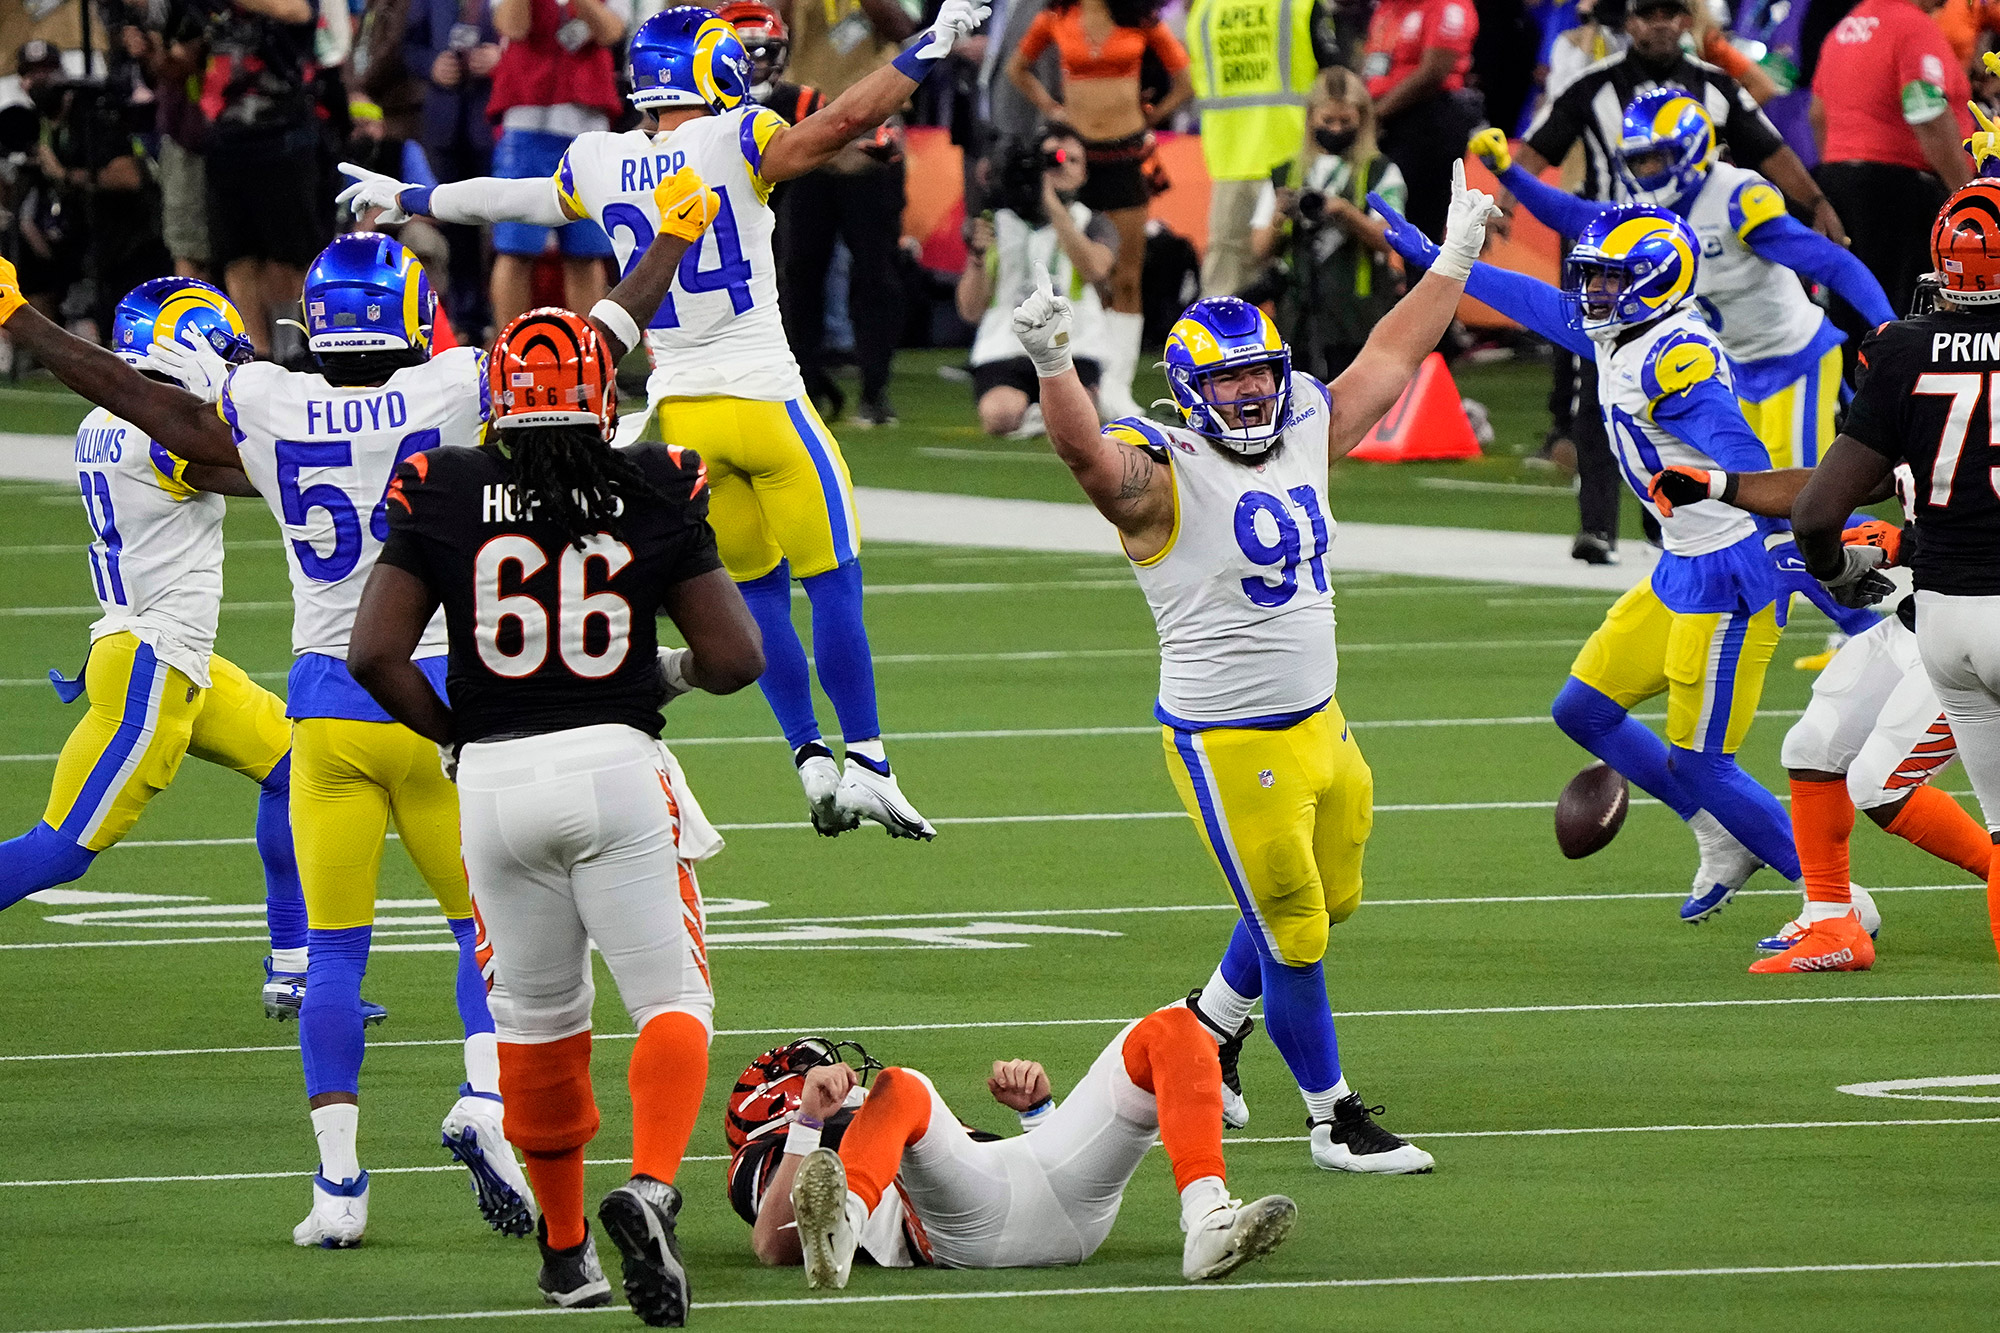 Confidencial doce Manía News and highlights from Super Bowl LVI: Rams vs Bengals